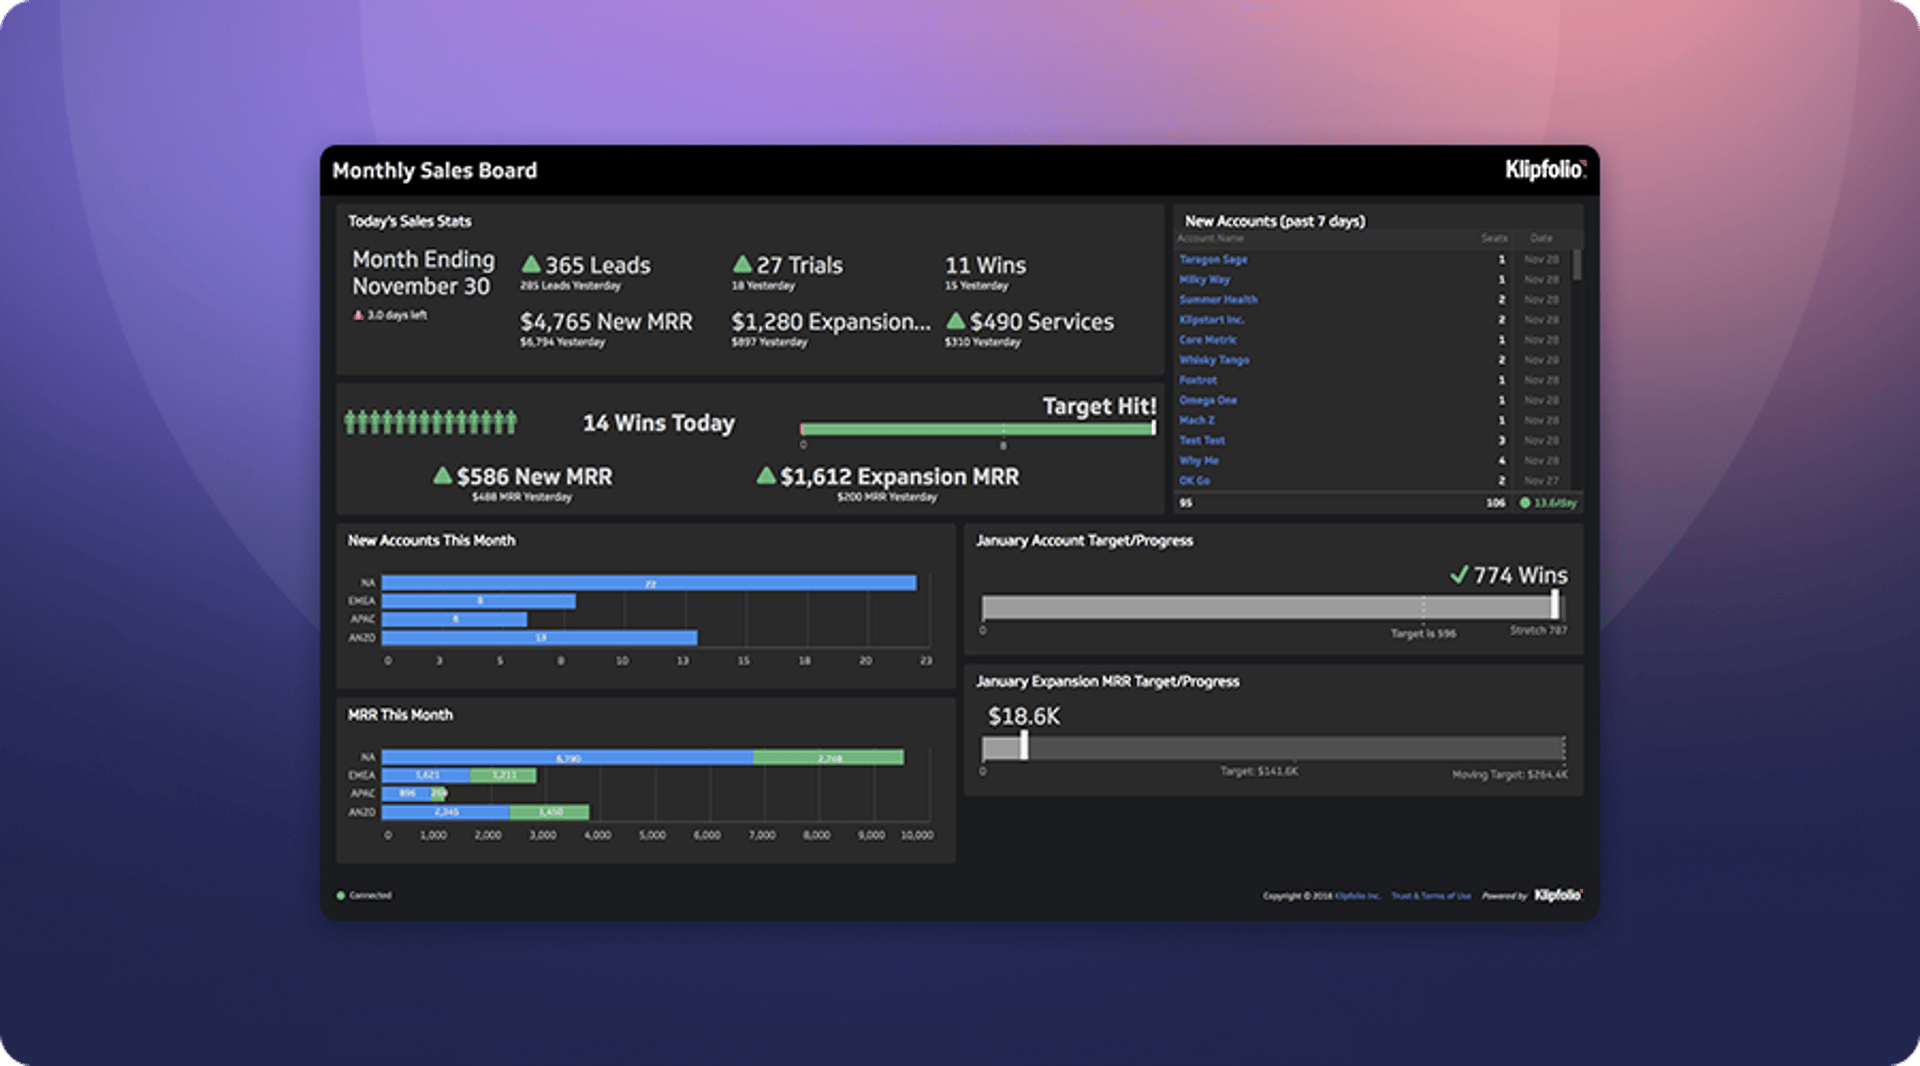 Current Performance Dashboard